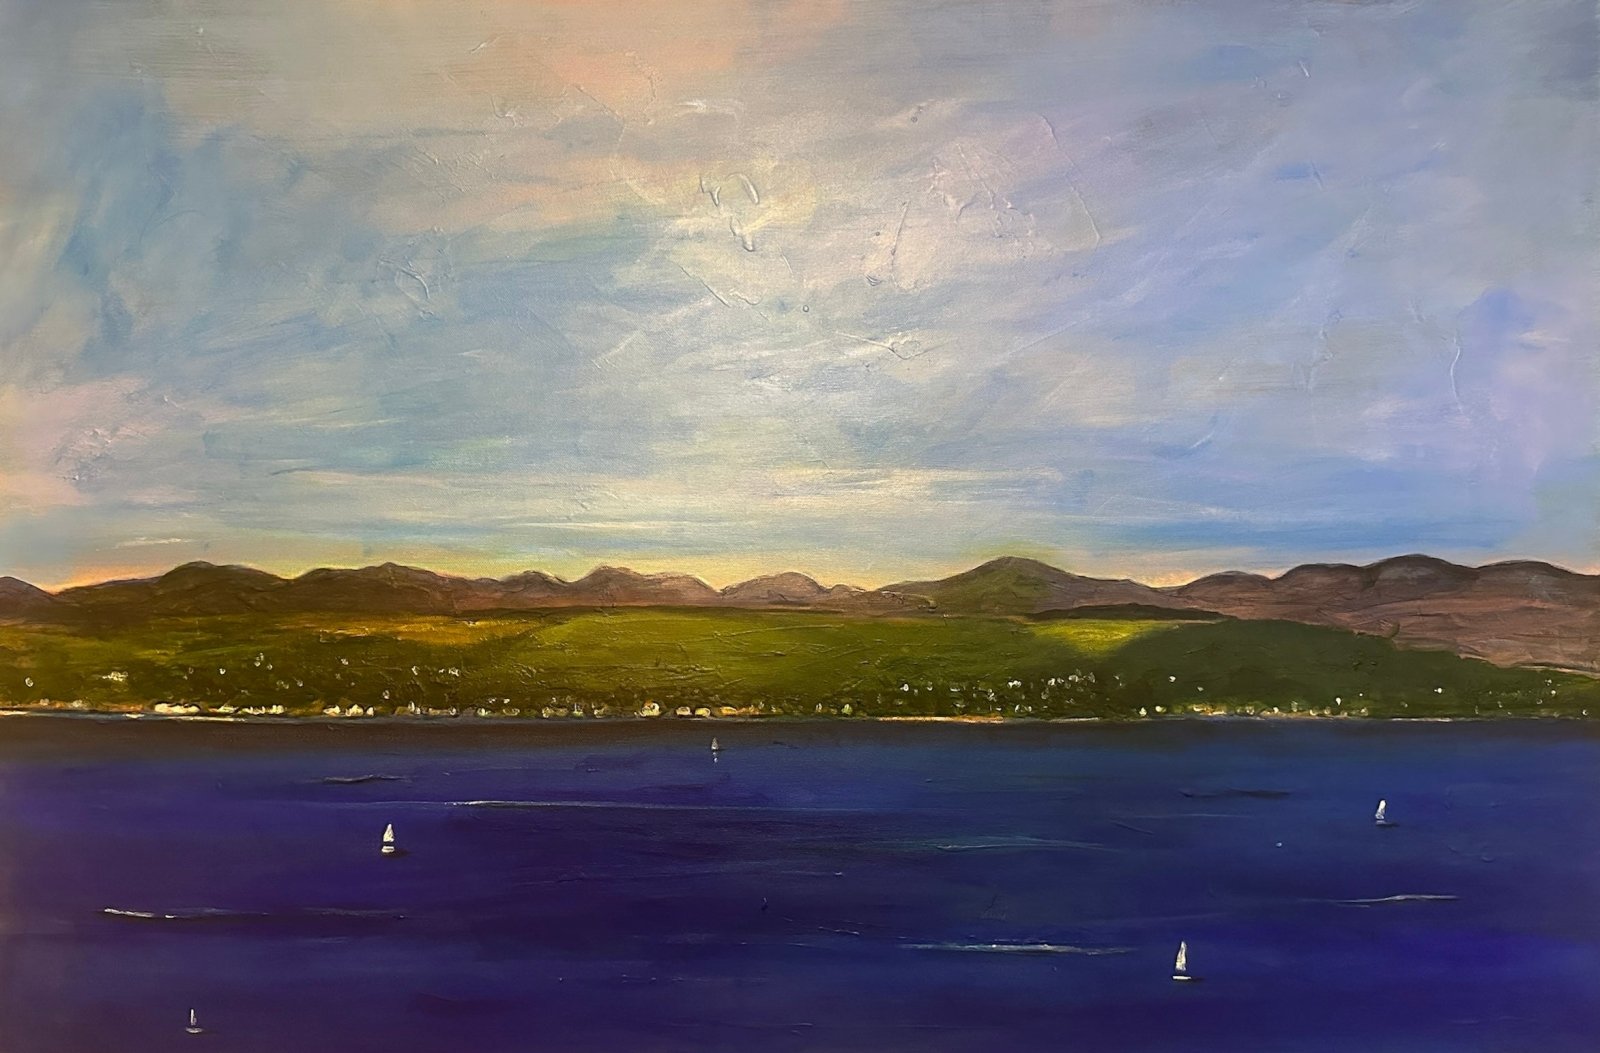 Looking From The Moorfoot Biggie-Signed Art Prints By Scottish Artist Hunter-River Clyde Art Gallery-Paintings, Prints, Homeware, Art Gifts From Scotland By Scottish Artist Kevin Hunter